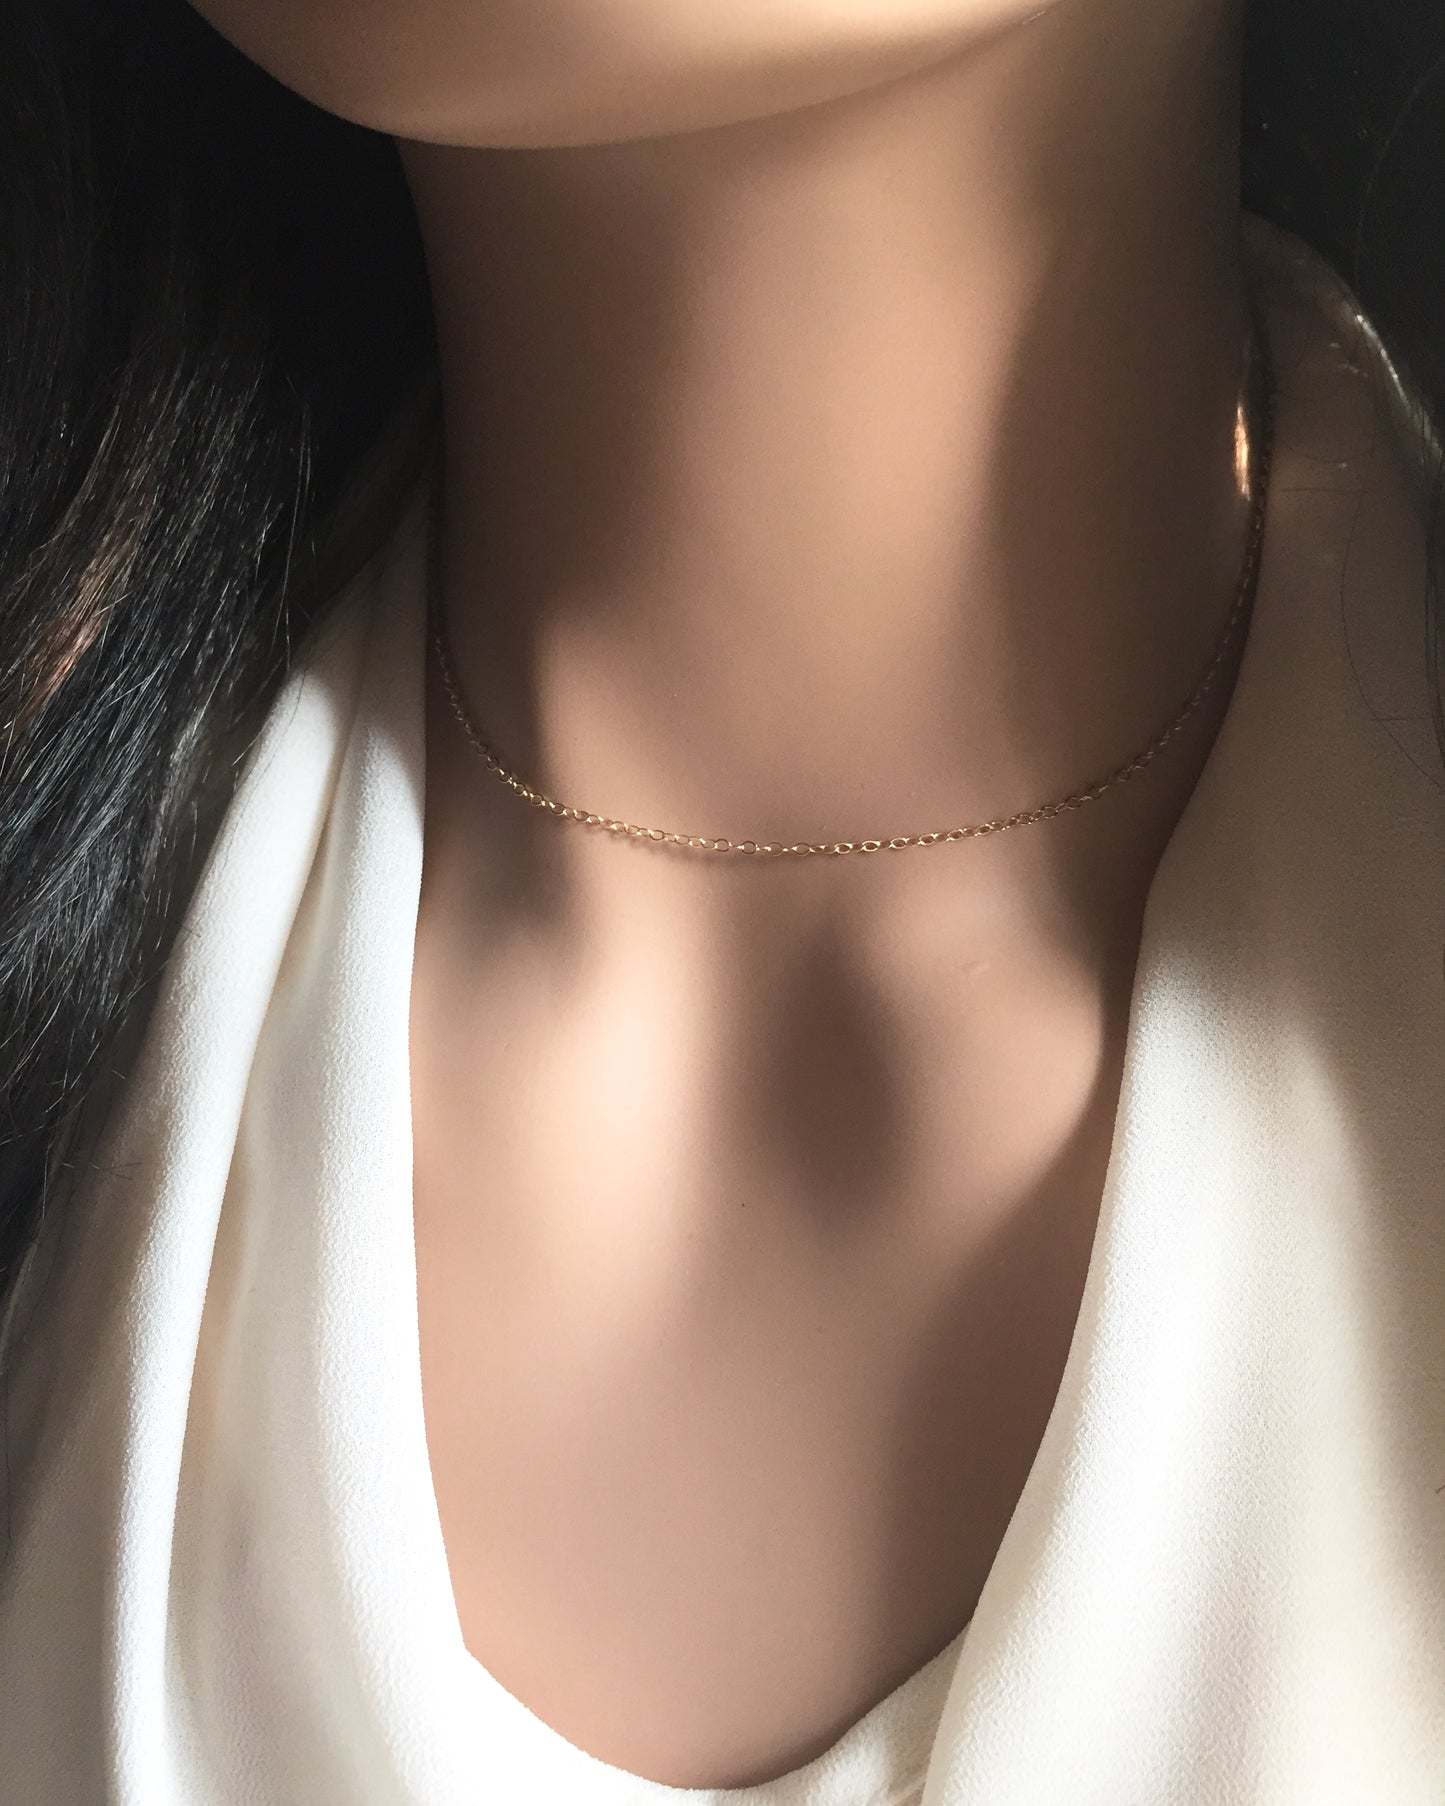 Small Dainty Necklace | Simple Delicate Chain Necklace | IB Jewelry